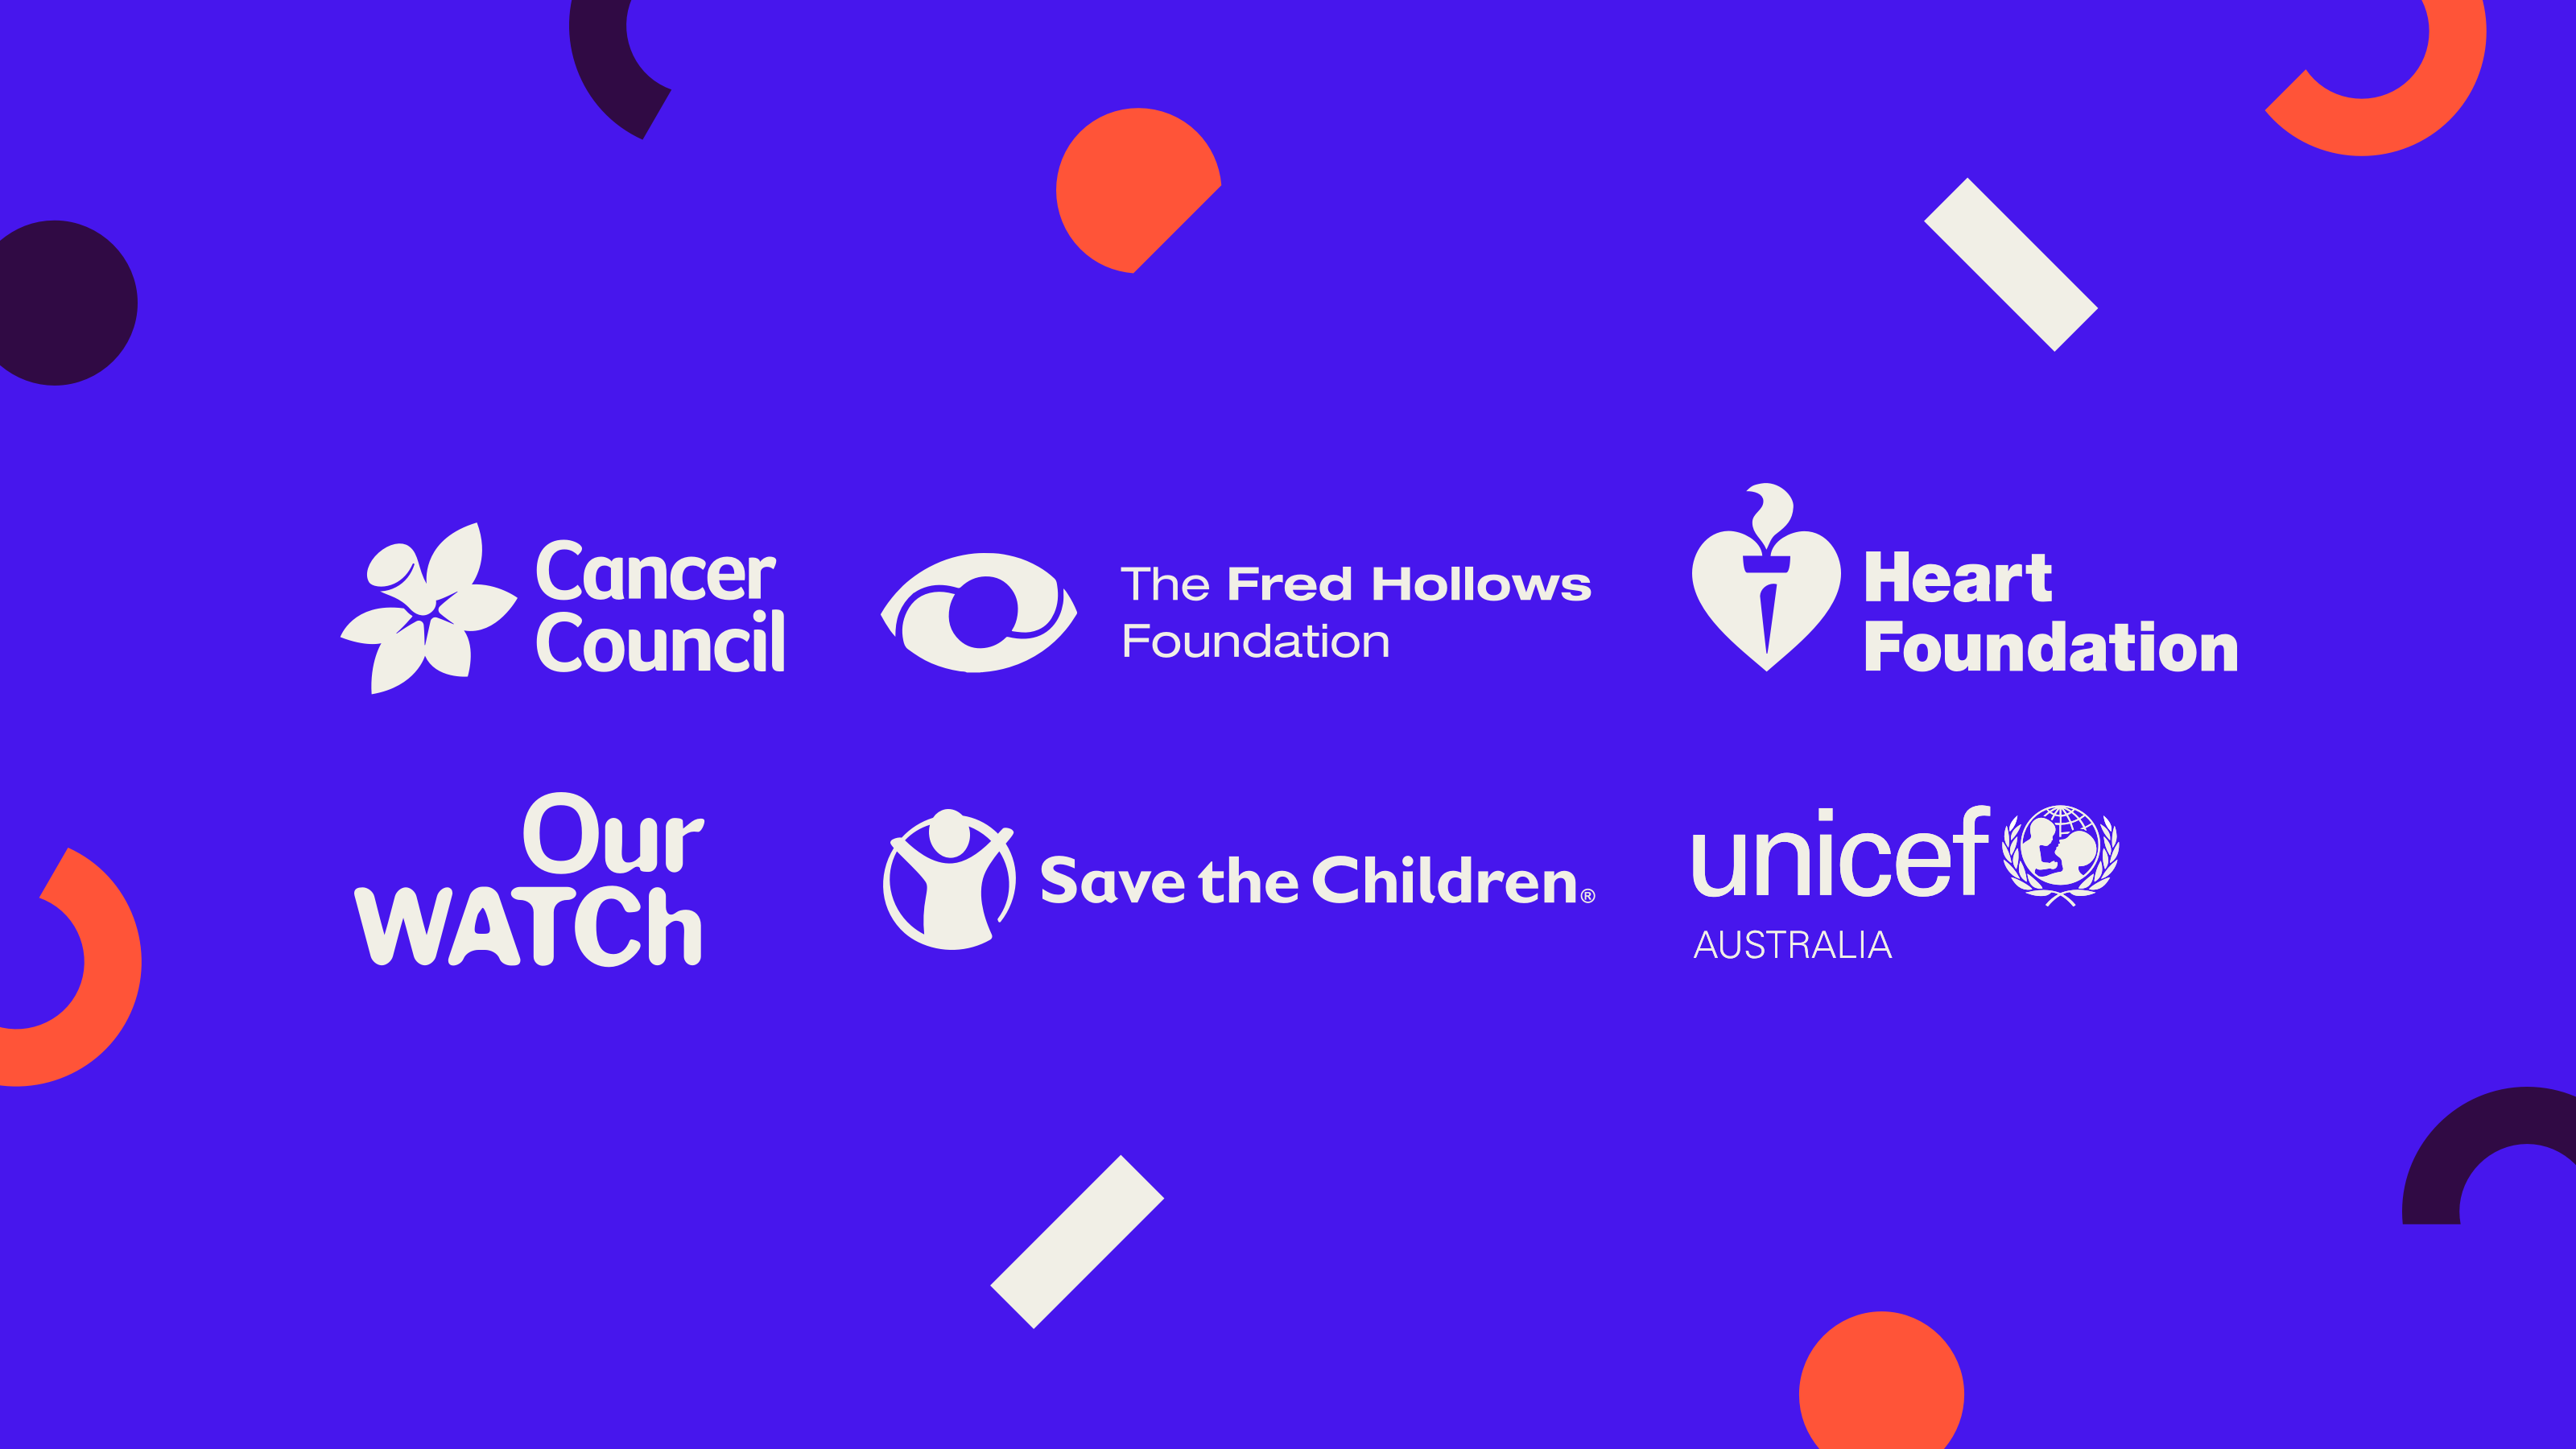 Logos for Cancer Council Australia, The Fred Hollows Foundation, Heart Foundation, Our Watch, Save the Children and UNICEF